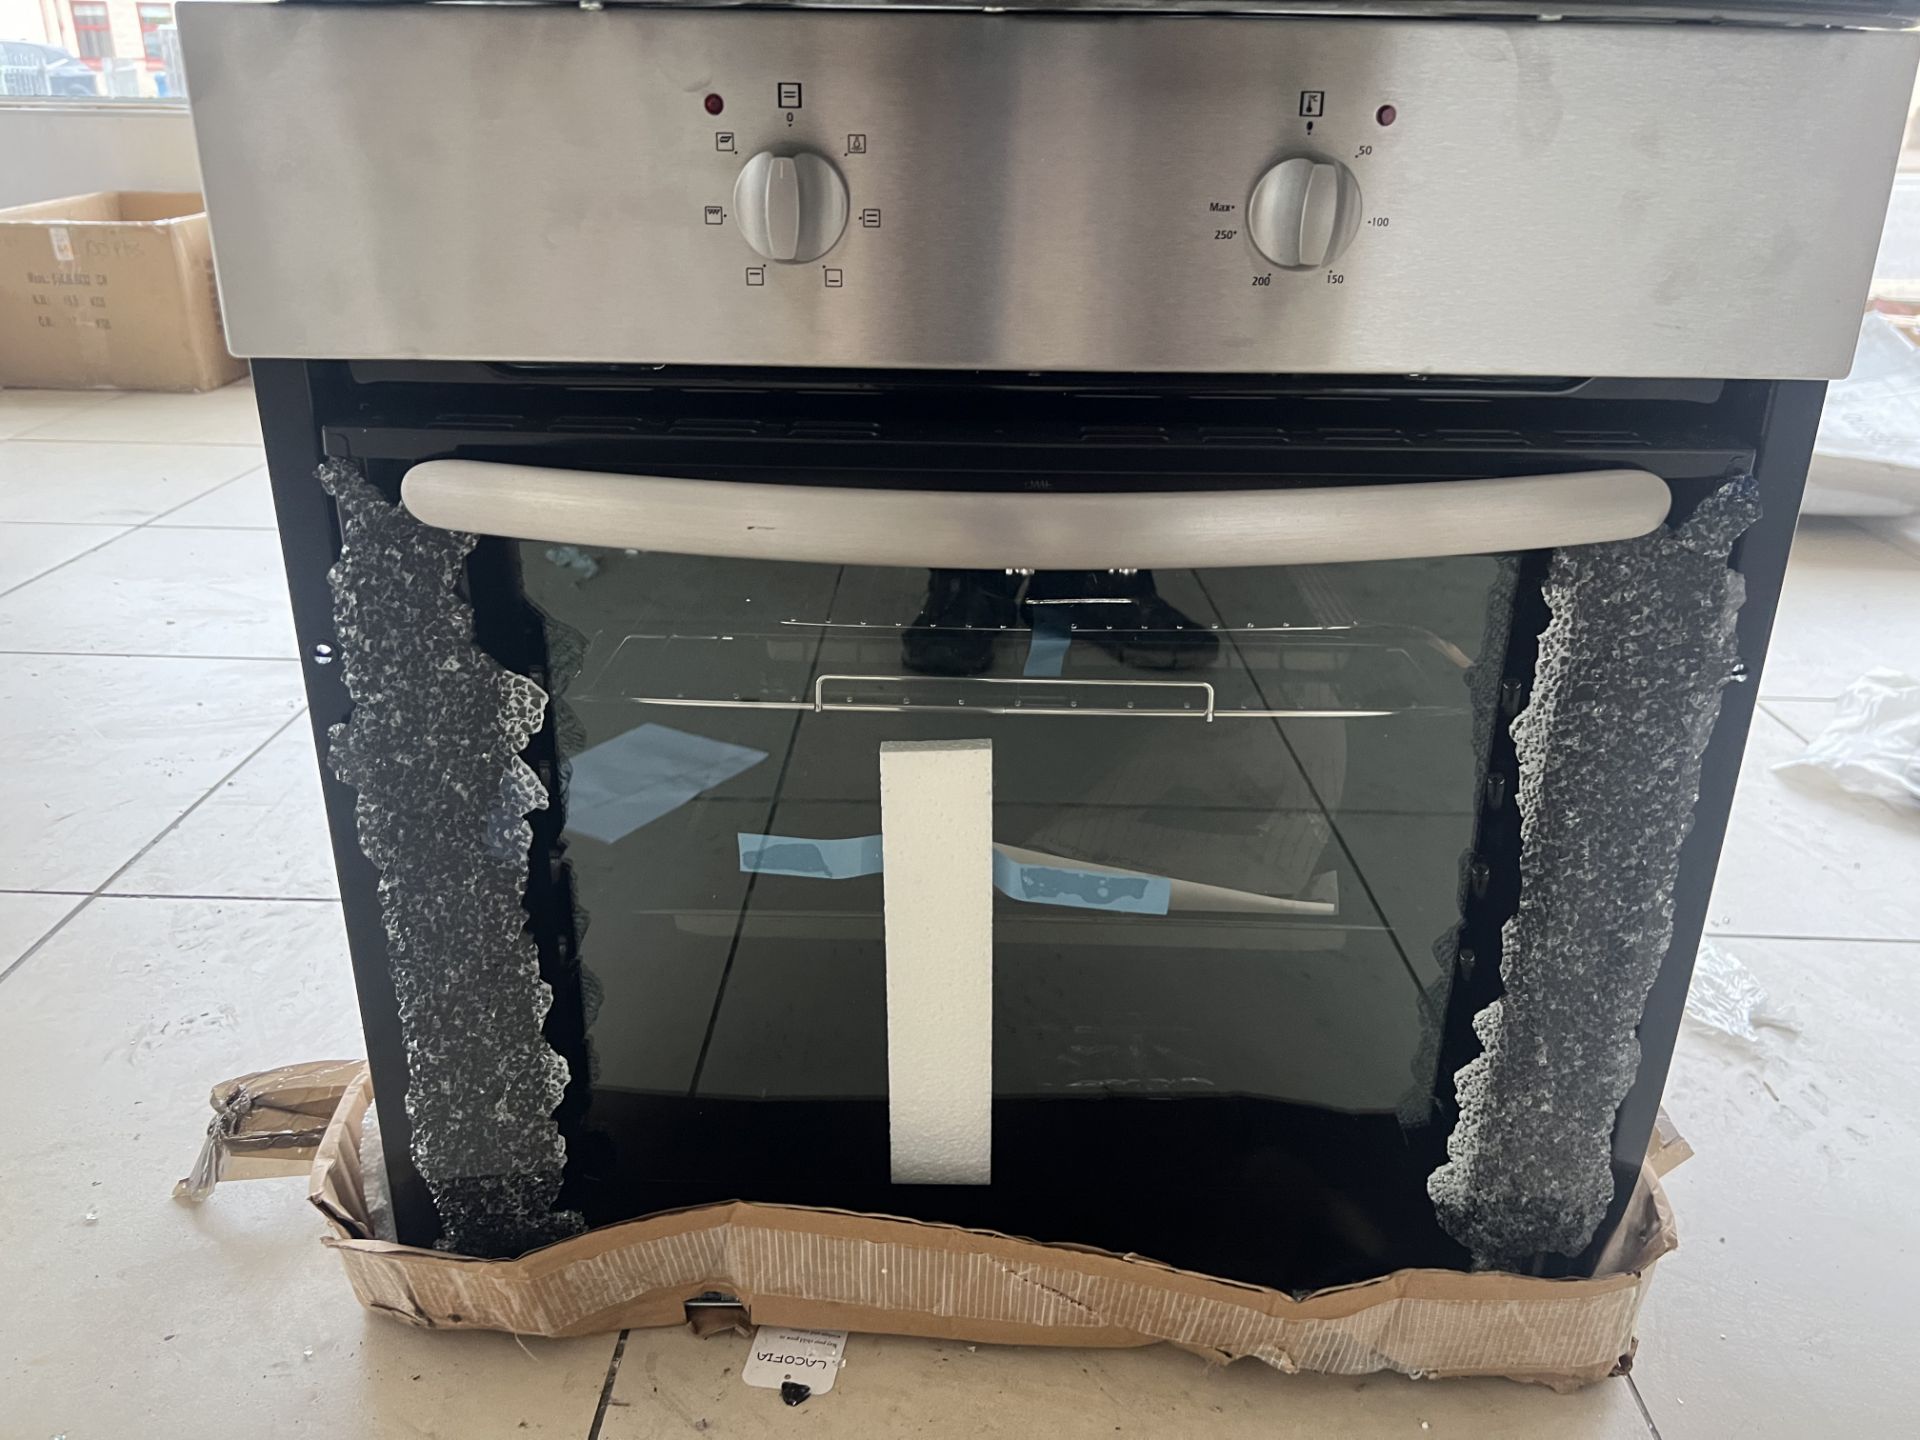 2X FAN OVENS (NEW BUT DAMAGED) - Image 2 of 3